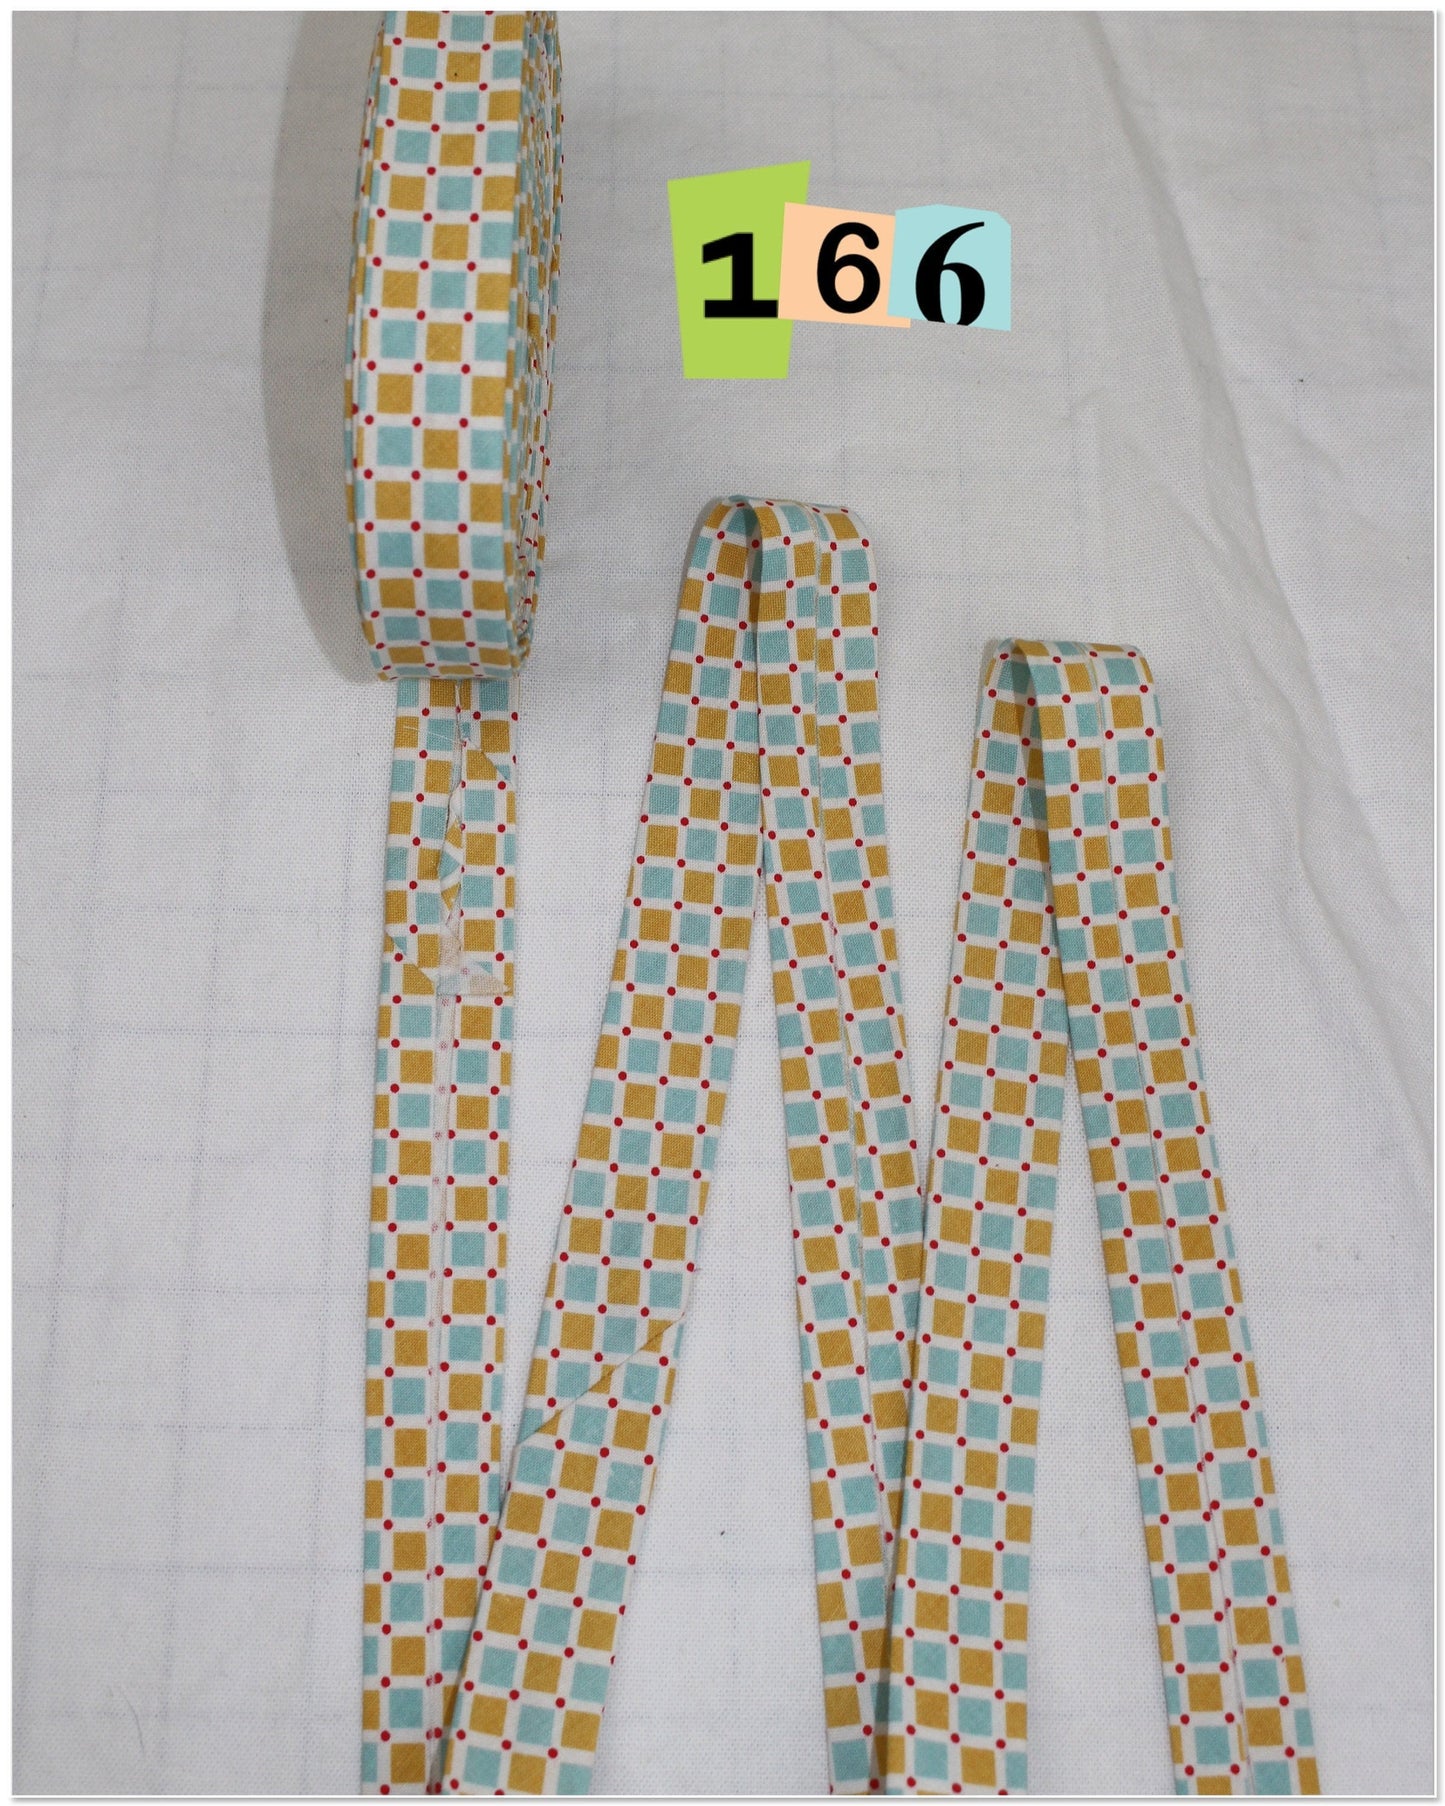 Bias Binding (Tape) 25mm, Cotton, Single Fold, hearts, line patterns. Fusible iron on available.